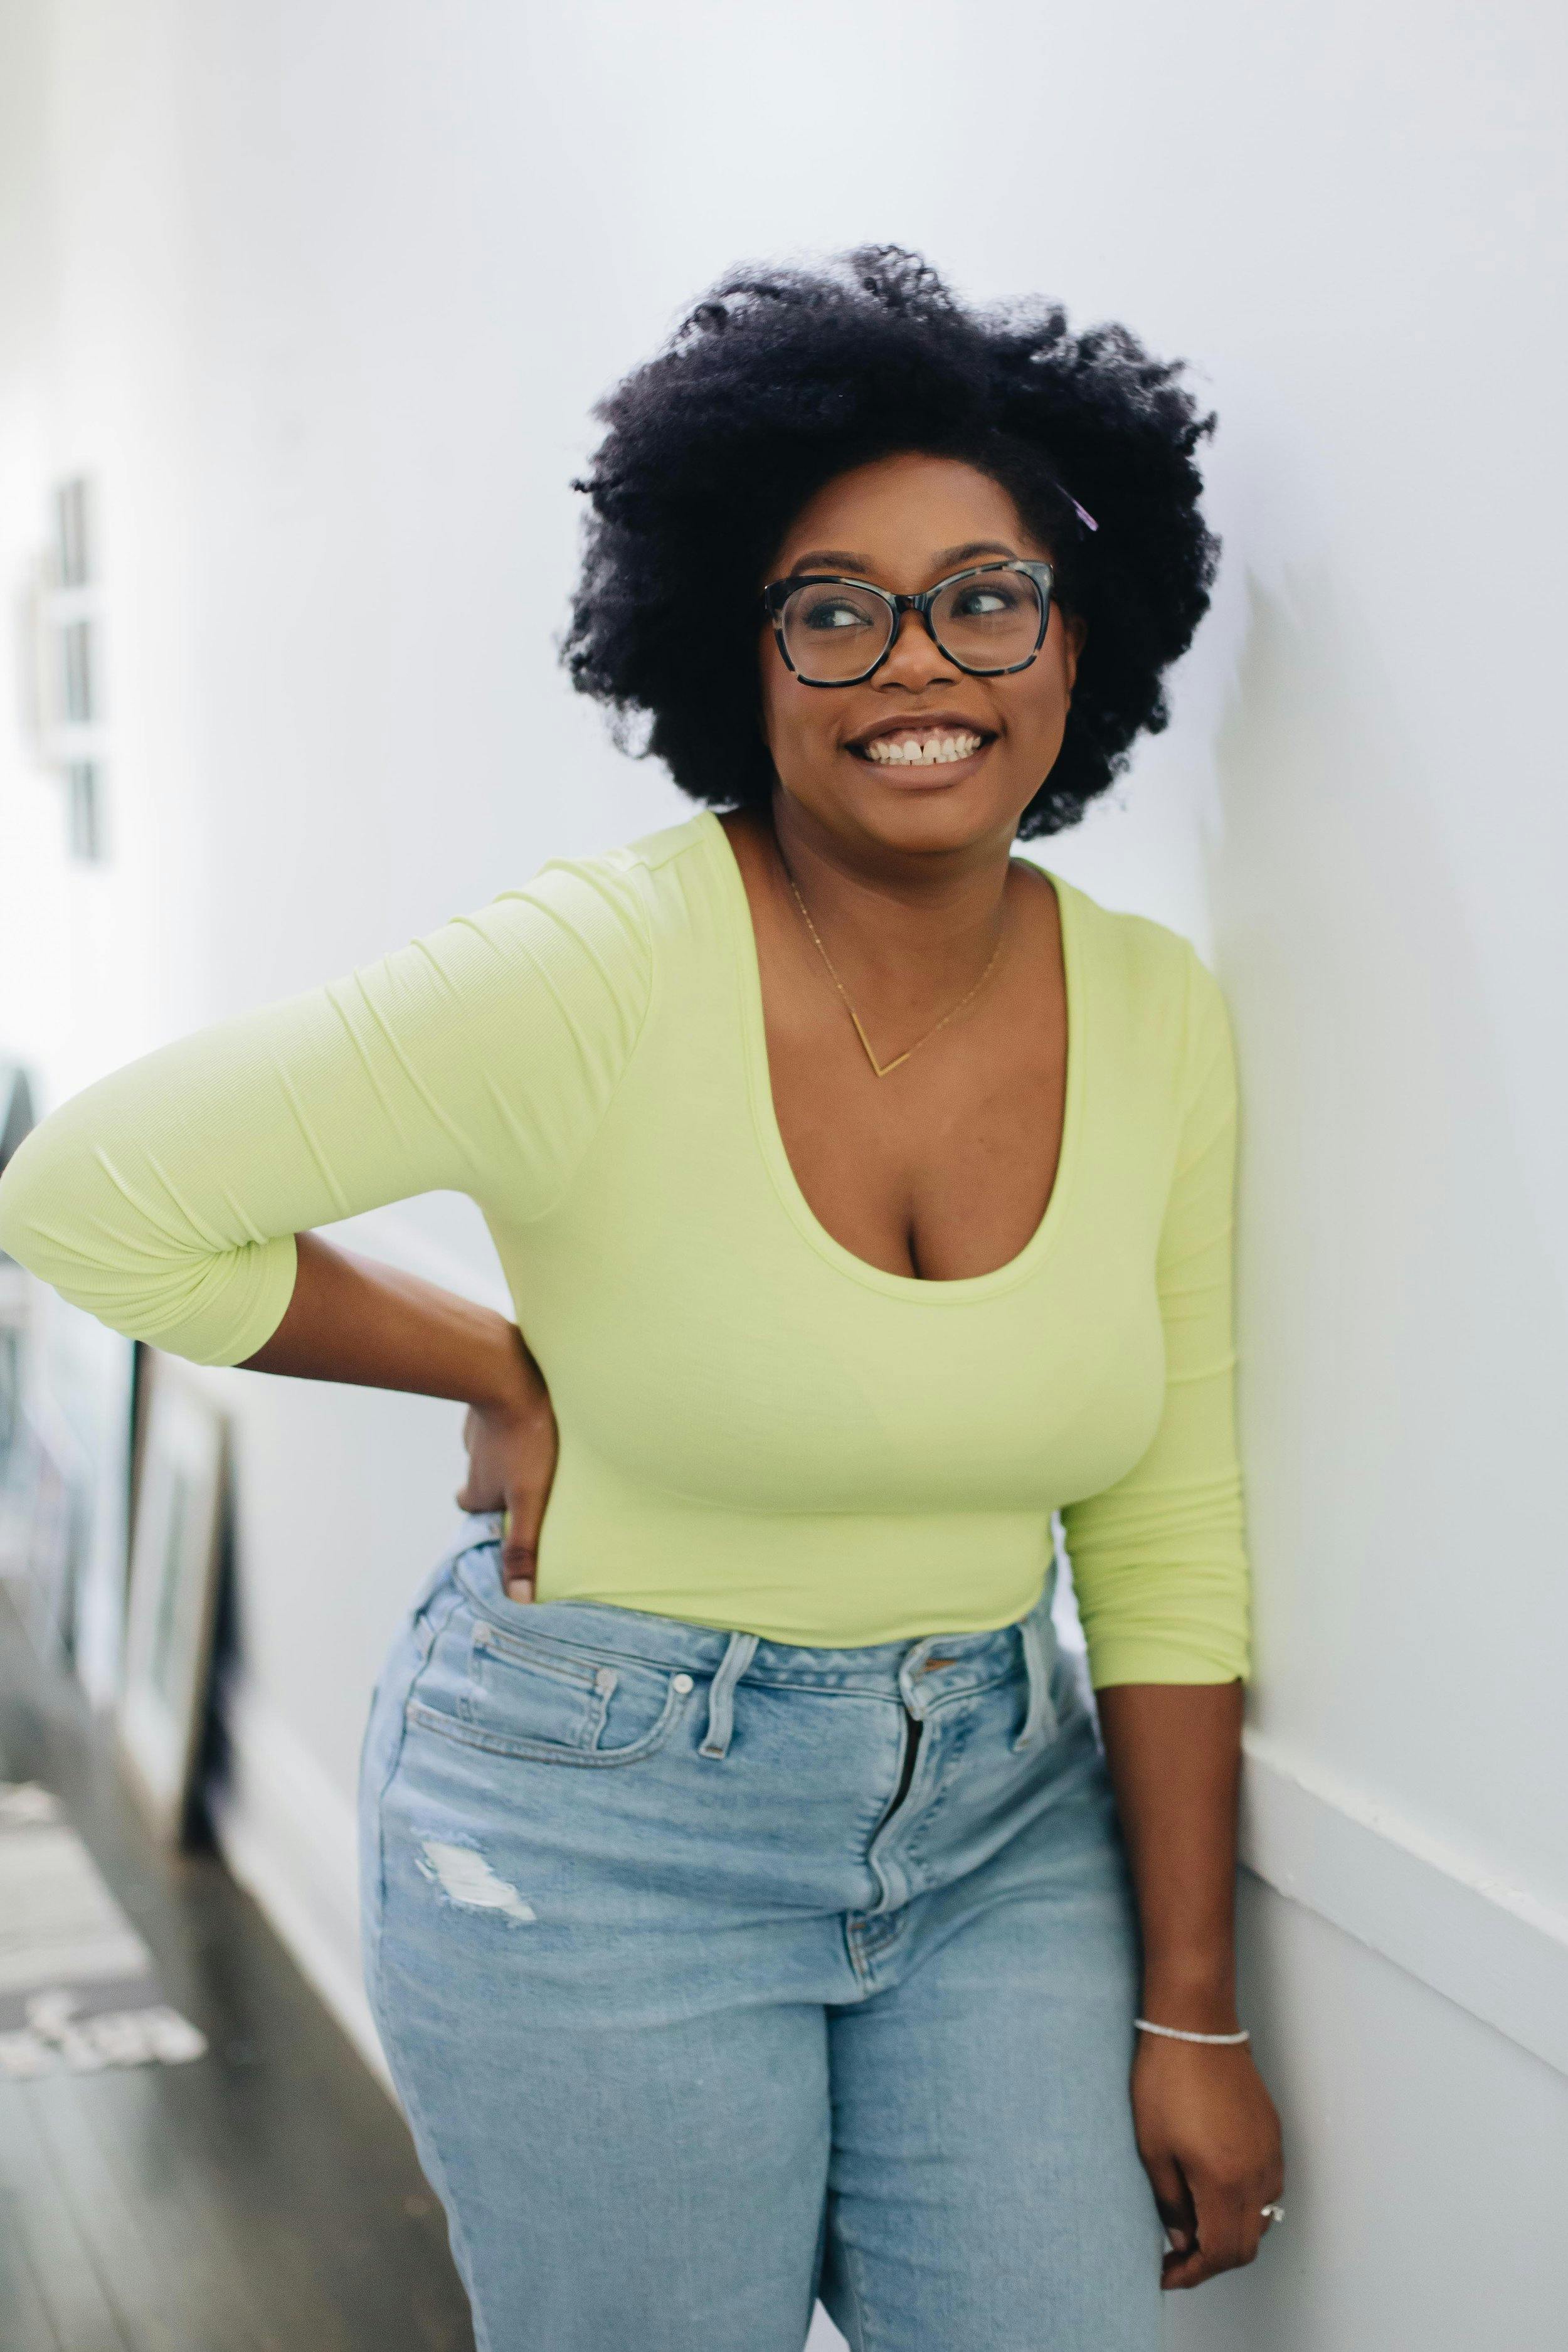 L'Oreal is a Black woman wearing a light green shirt and jeans. She is smiling as she leans against a wall. 